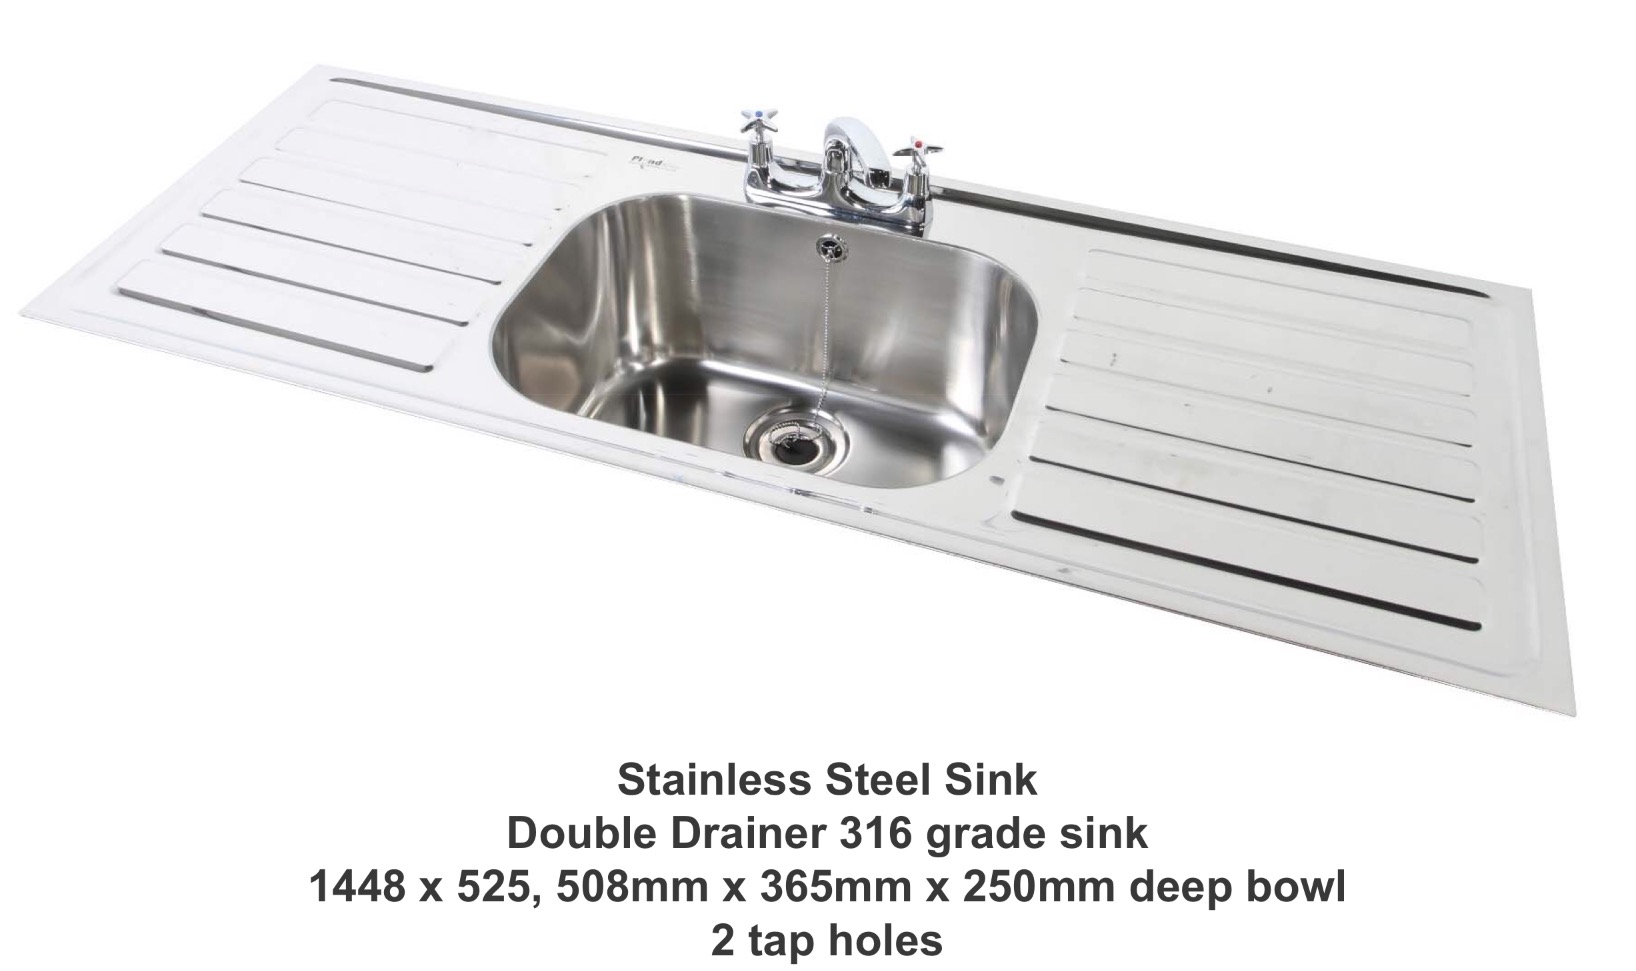 Double drainer Stainless Steel Sink 